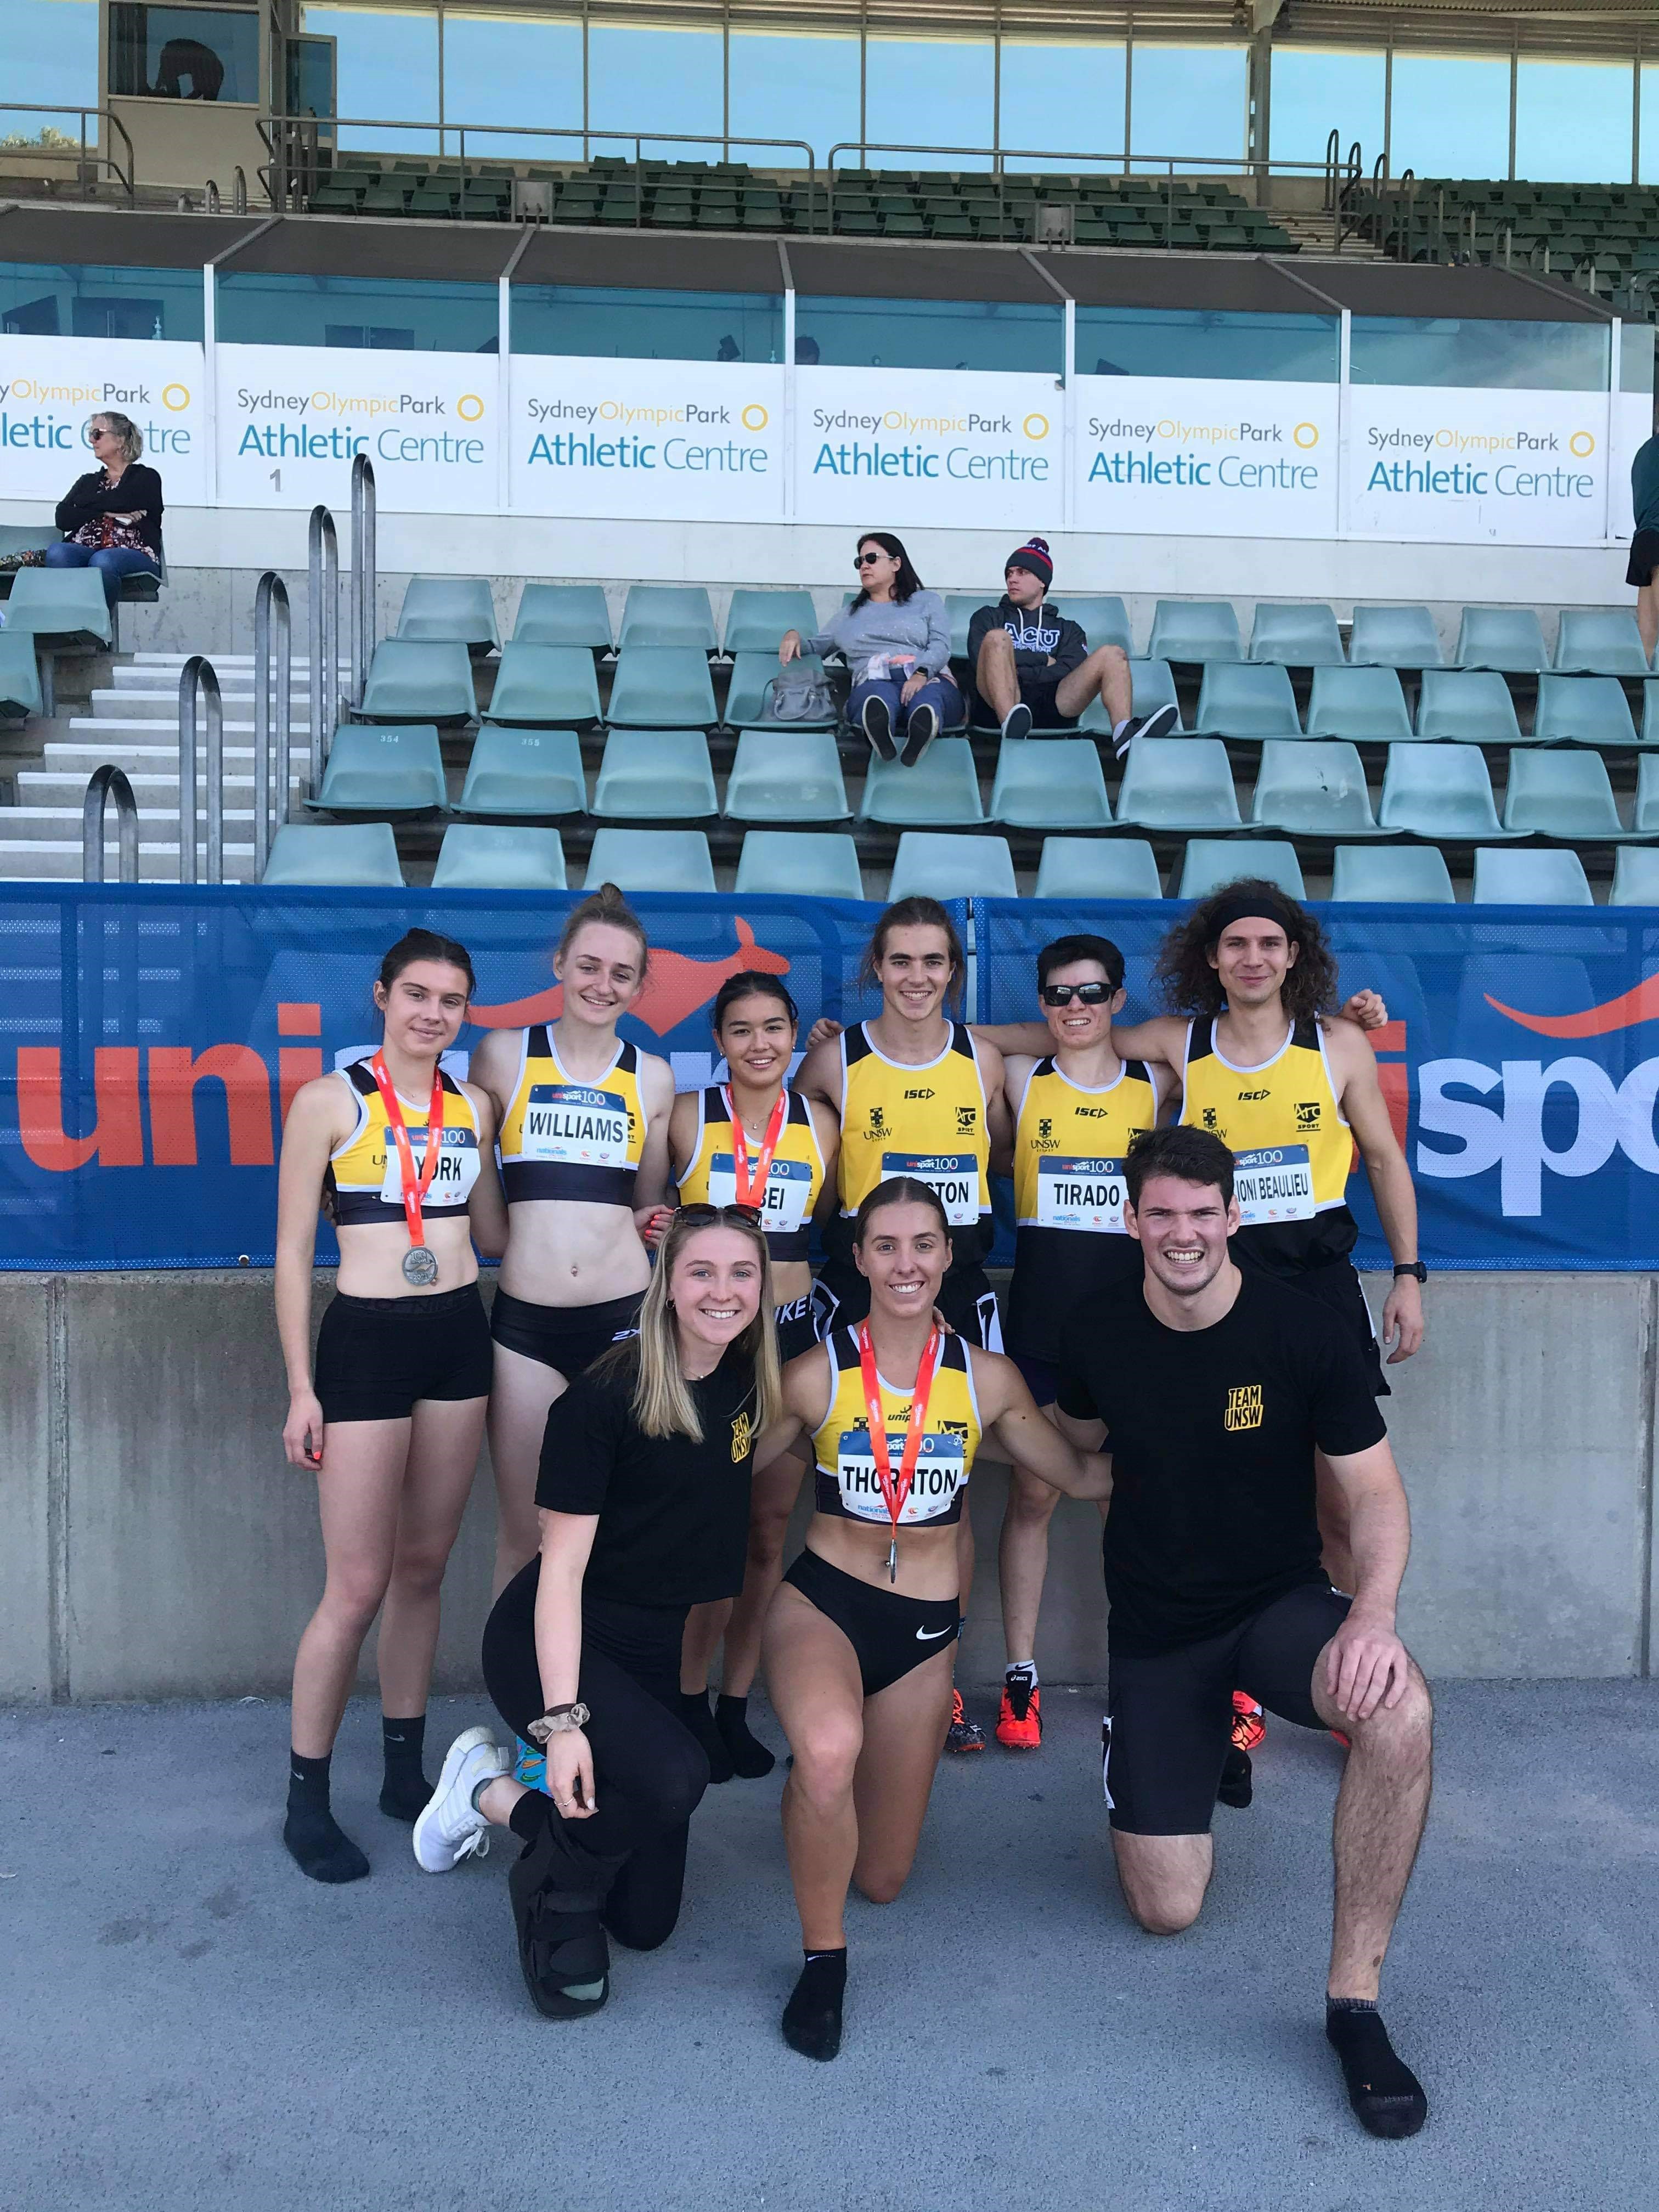 UNSW Athletics team after the event